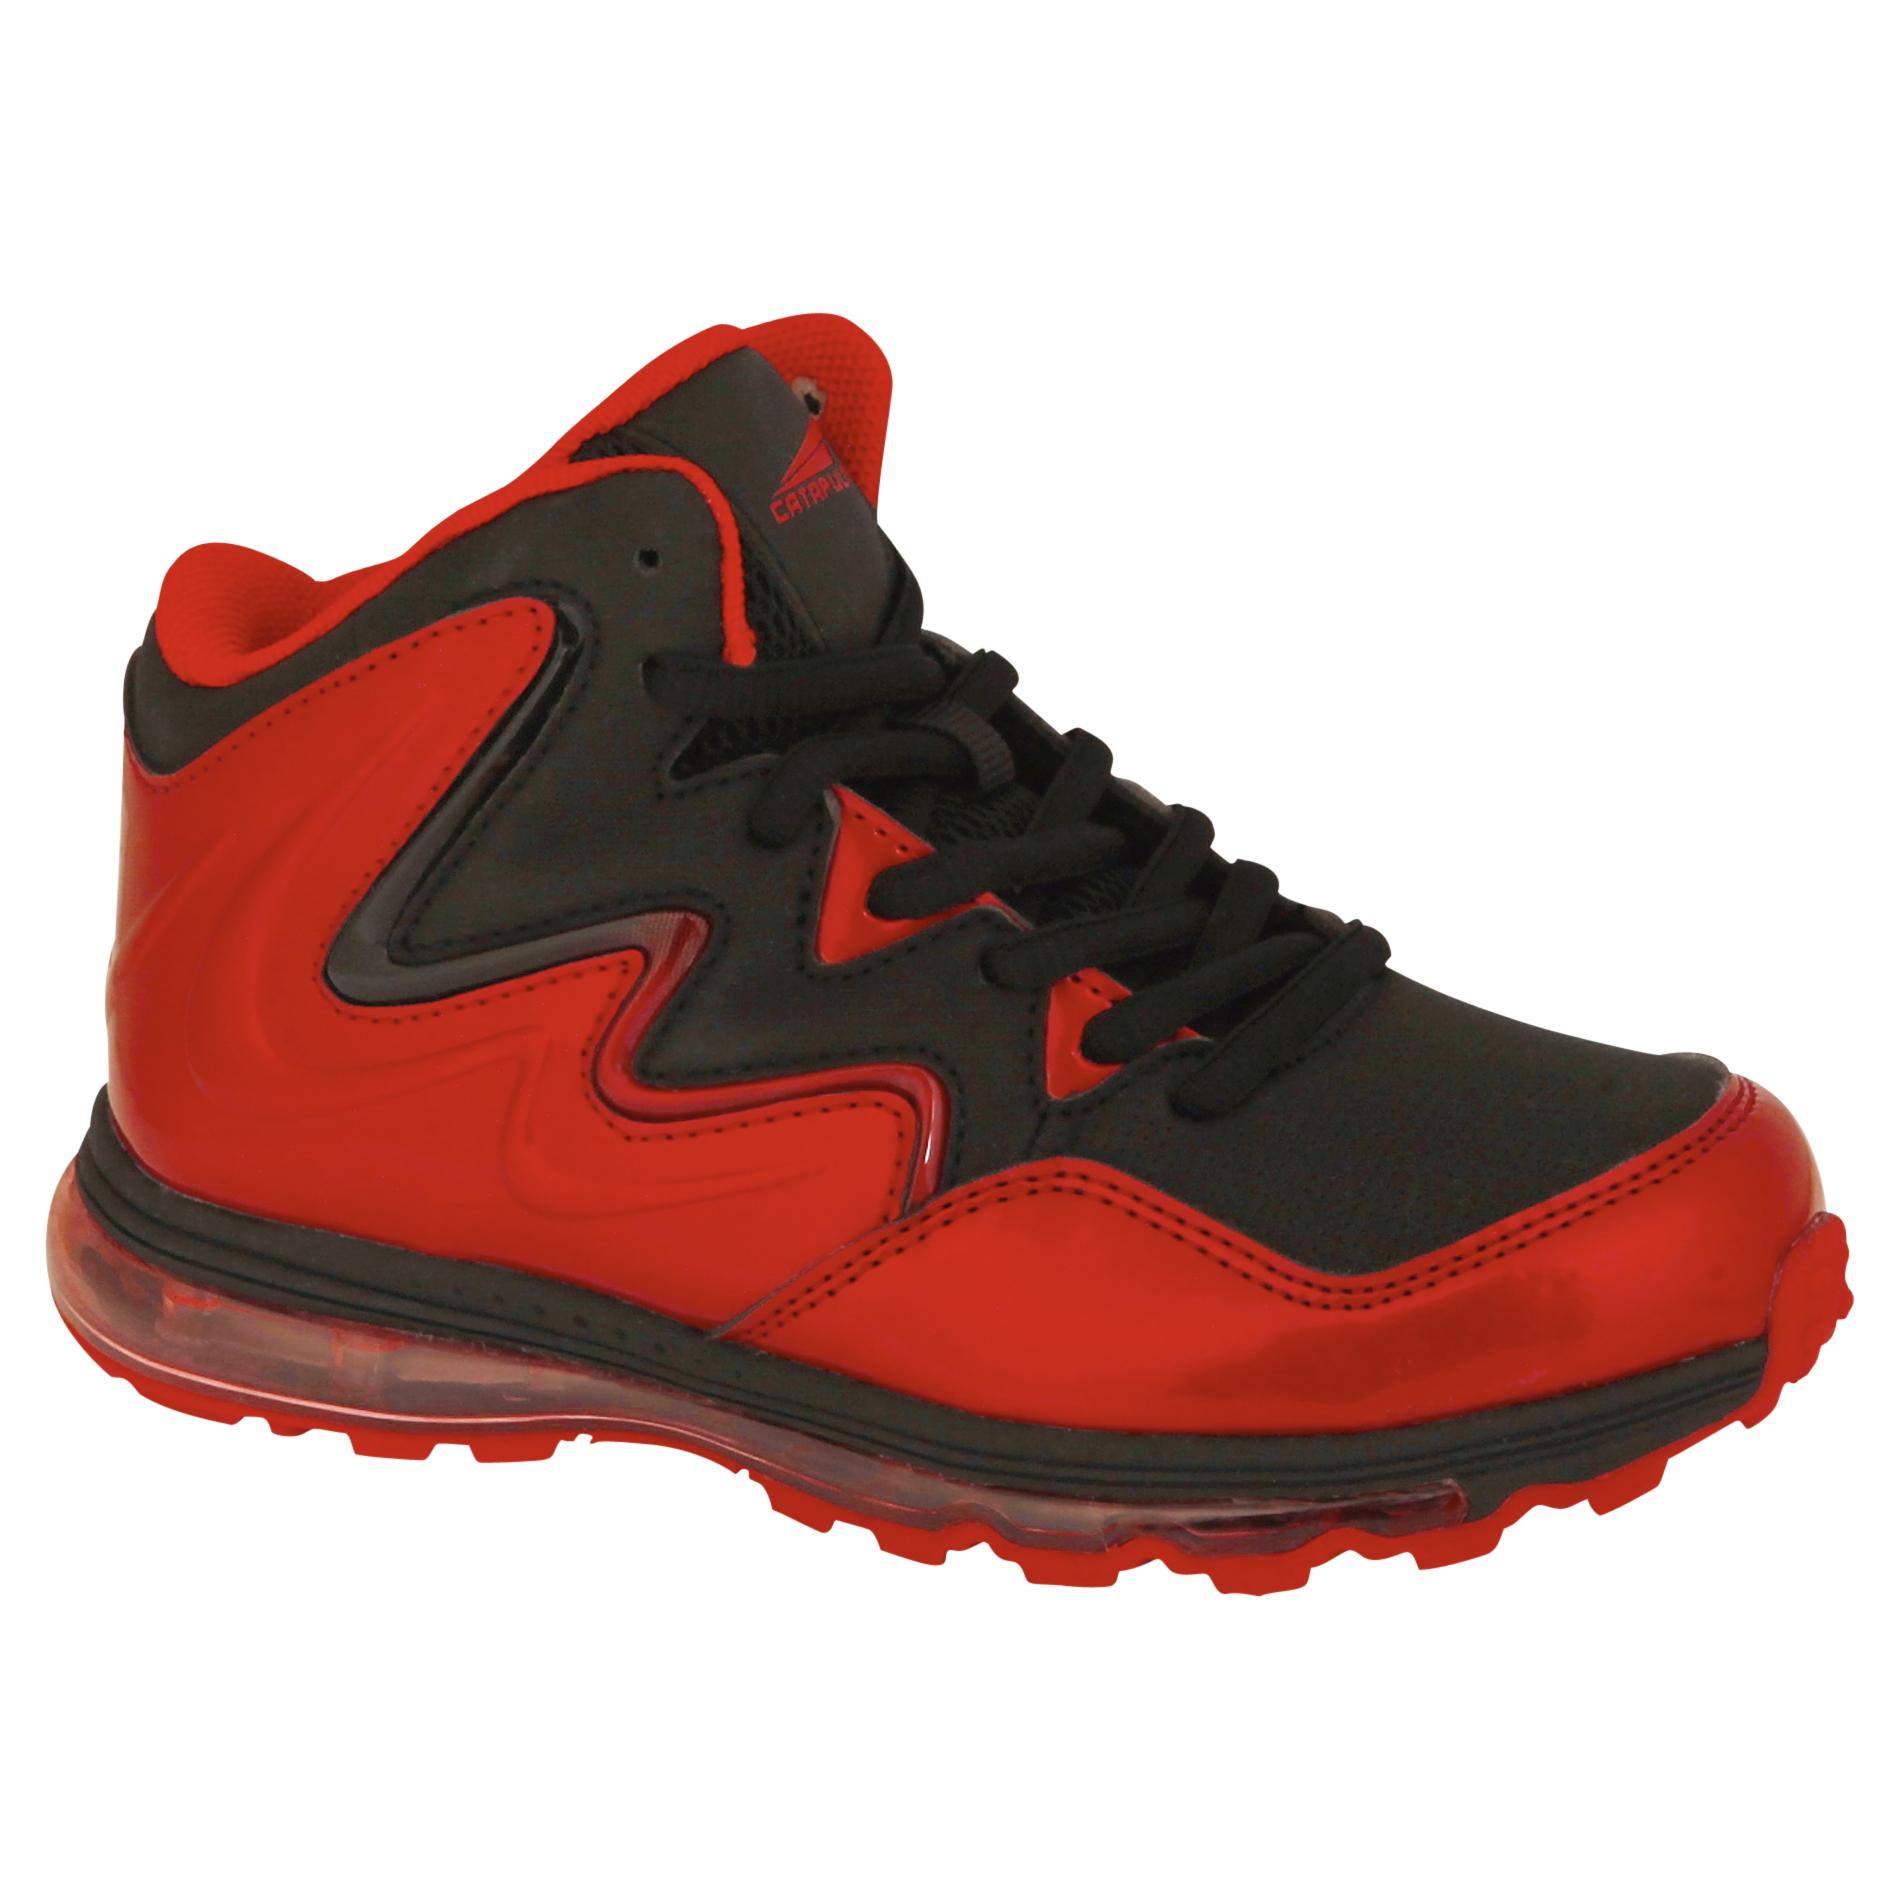 CATAPULT Boy's Sneaker Chase Hi-Top - Red/Black